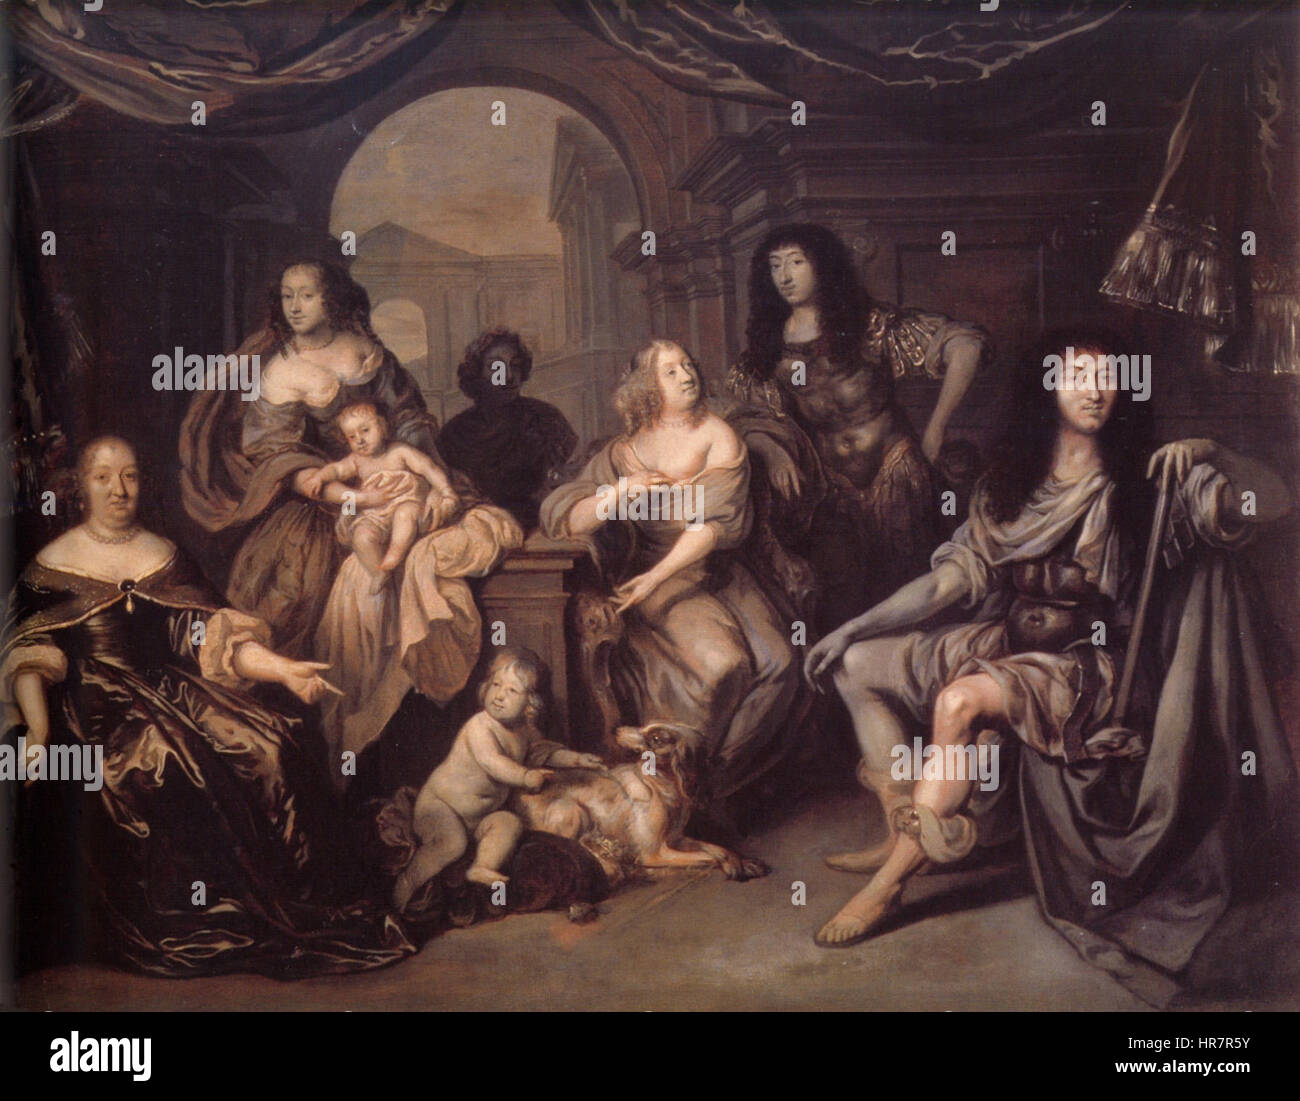 The French Royal Family in circa 1663 by Jacob van Loo Stock Photo - Alamy